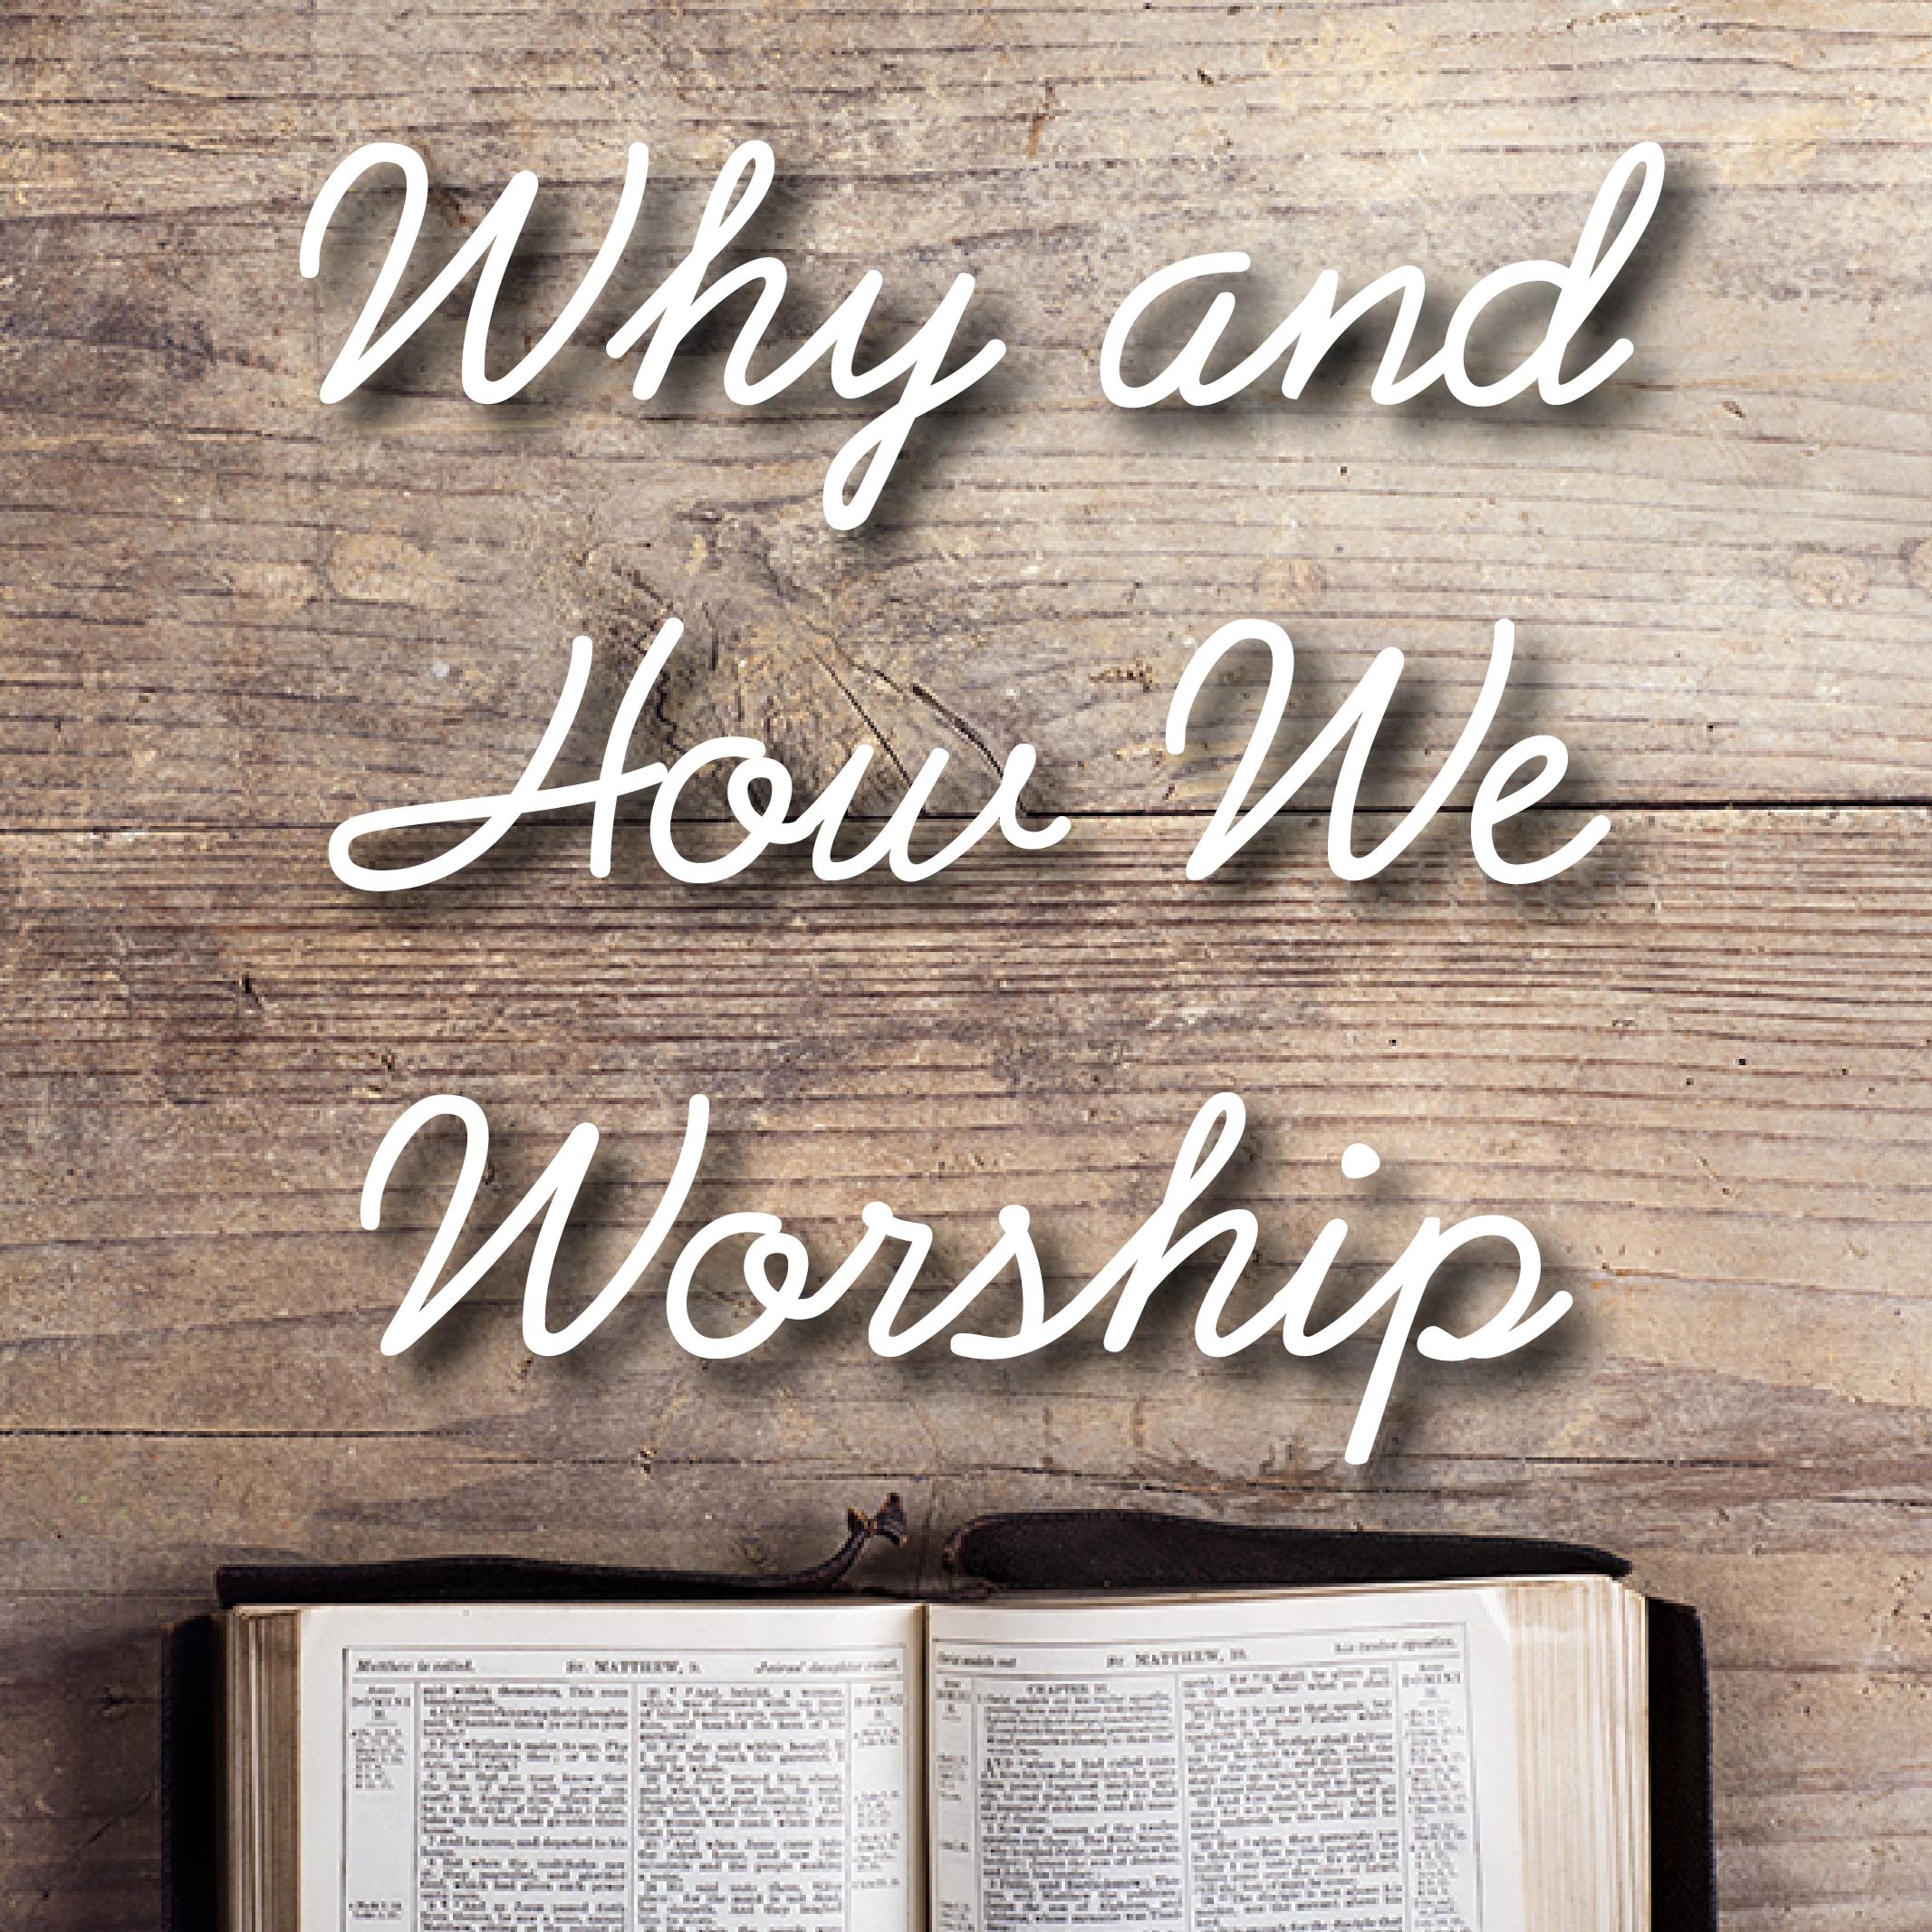 Why and How We Worship